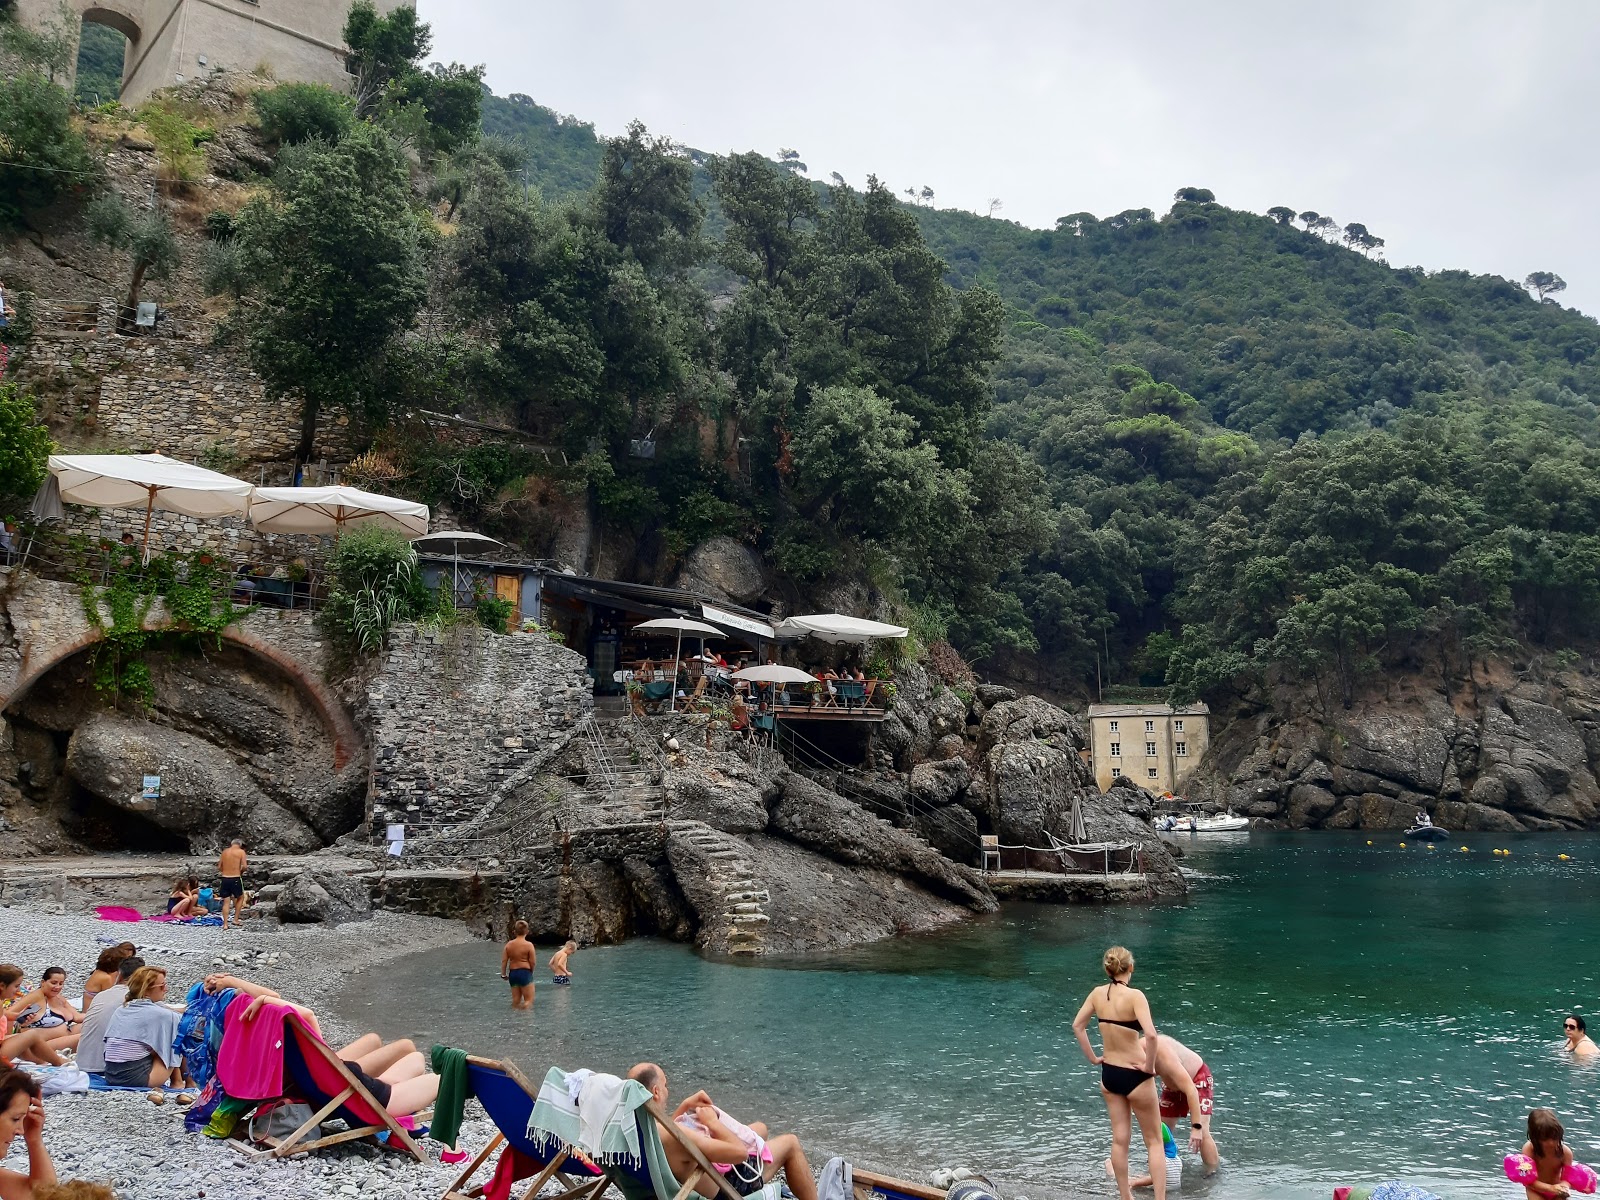 Photo of Spiaggia San Fruttuoso backed by cliffs